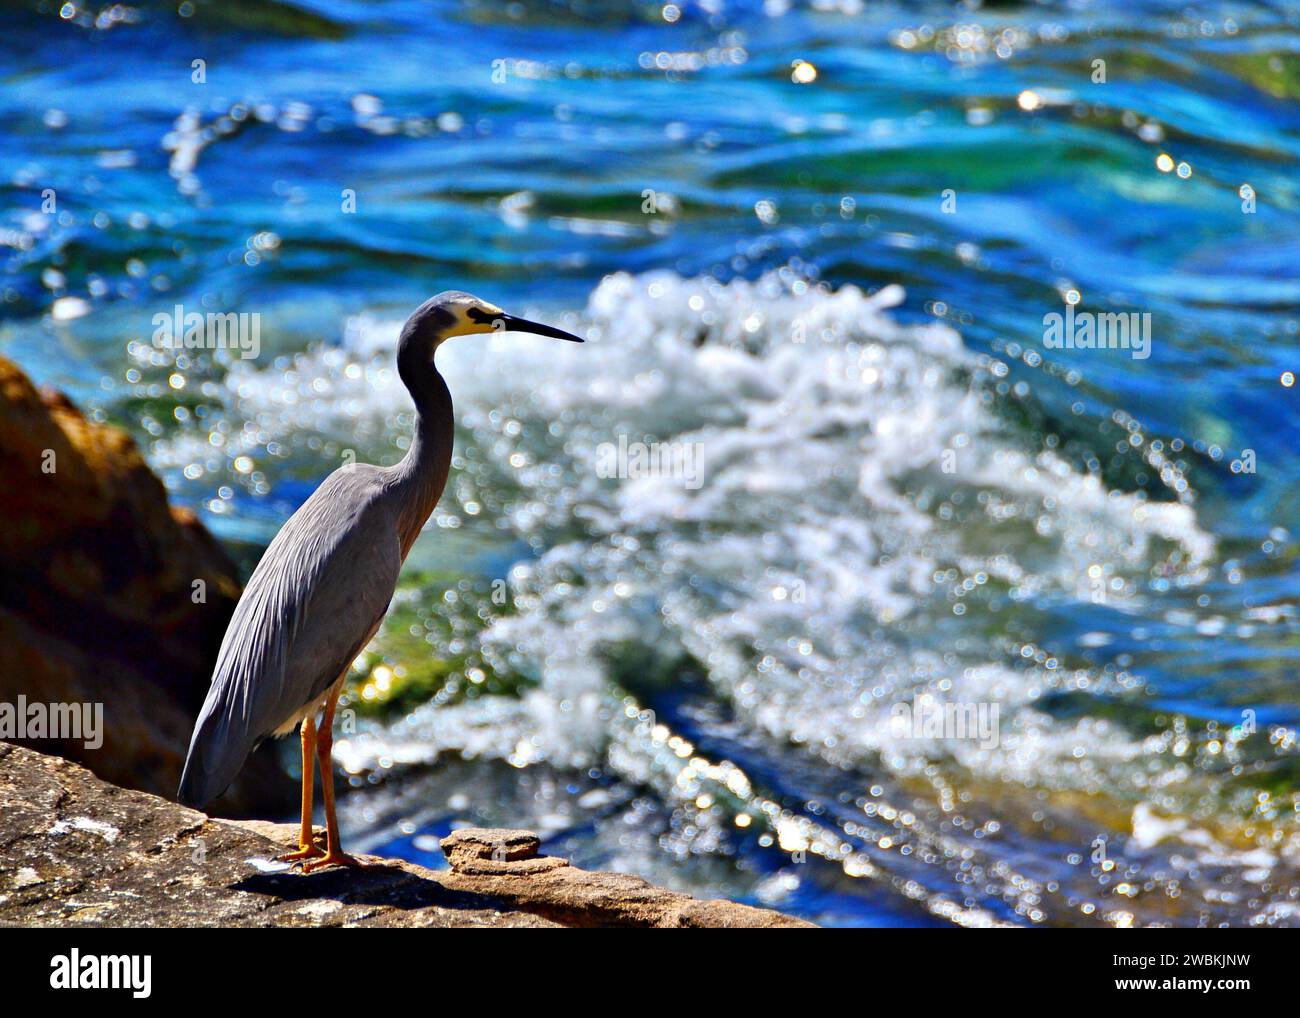 A white faced heron by the beach seems to be having a deep thought. Or possibly patiently waiting for preys. Stock Photo